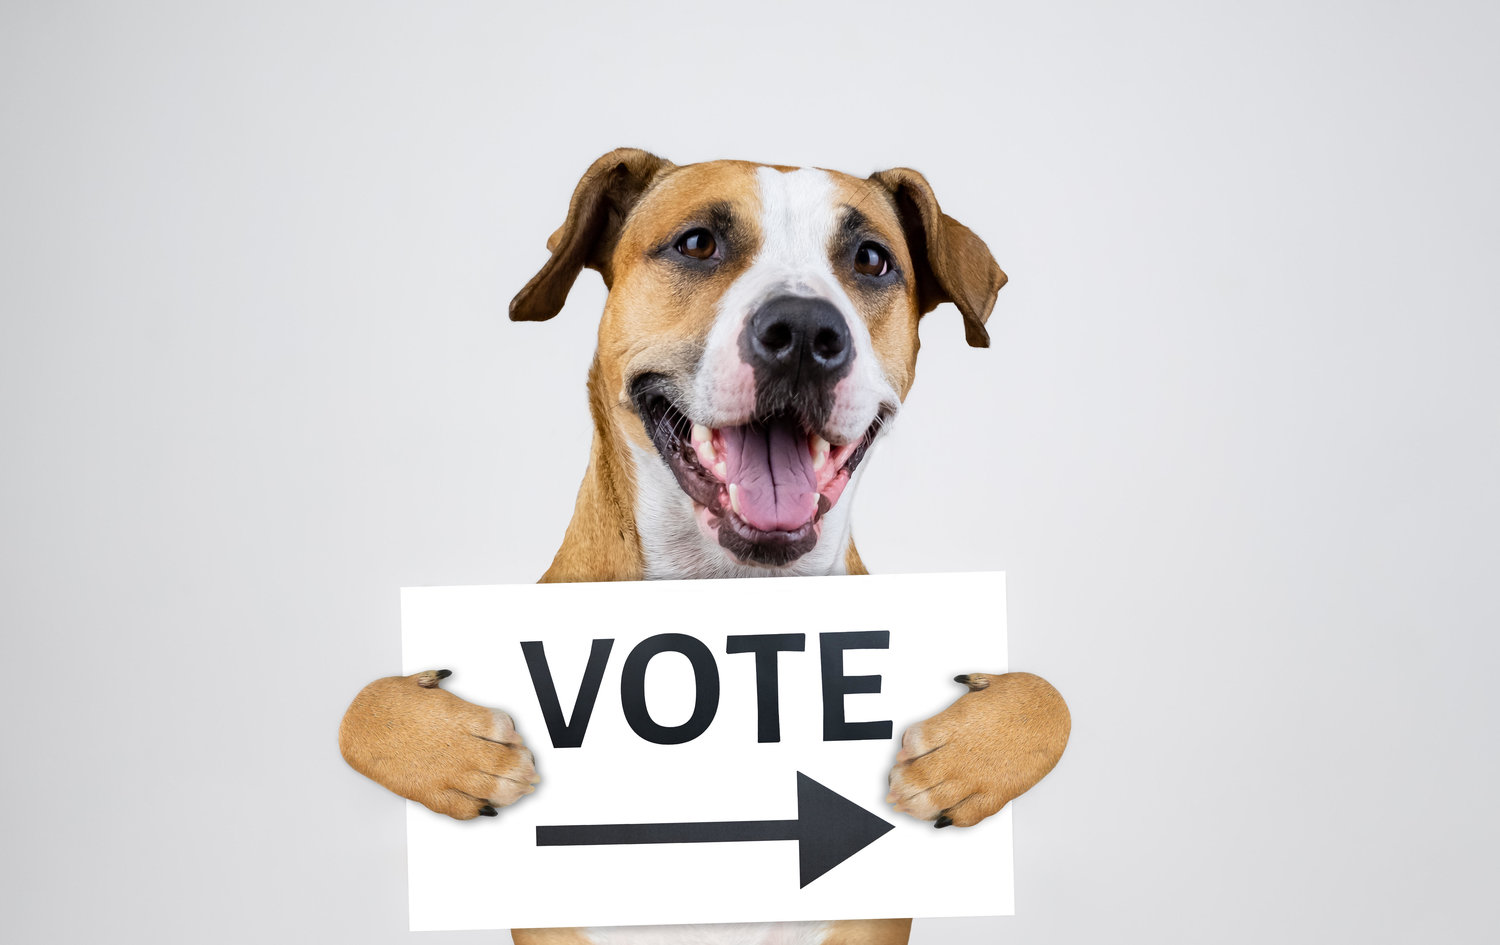 R1N65E American election activism concept with staffordshire terrier dog.  Funny pitbull terrier holds "vote" sign in studio background